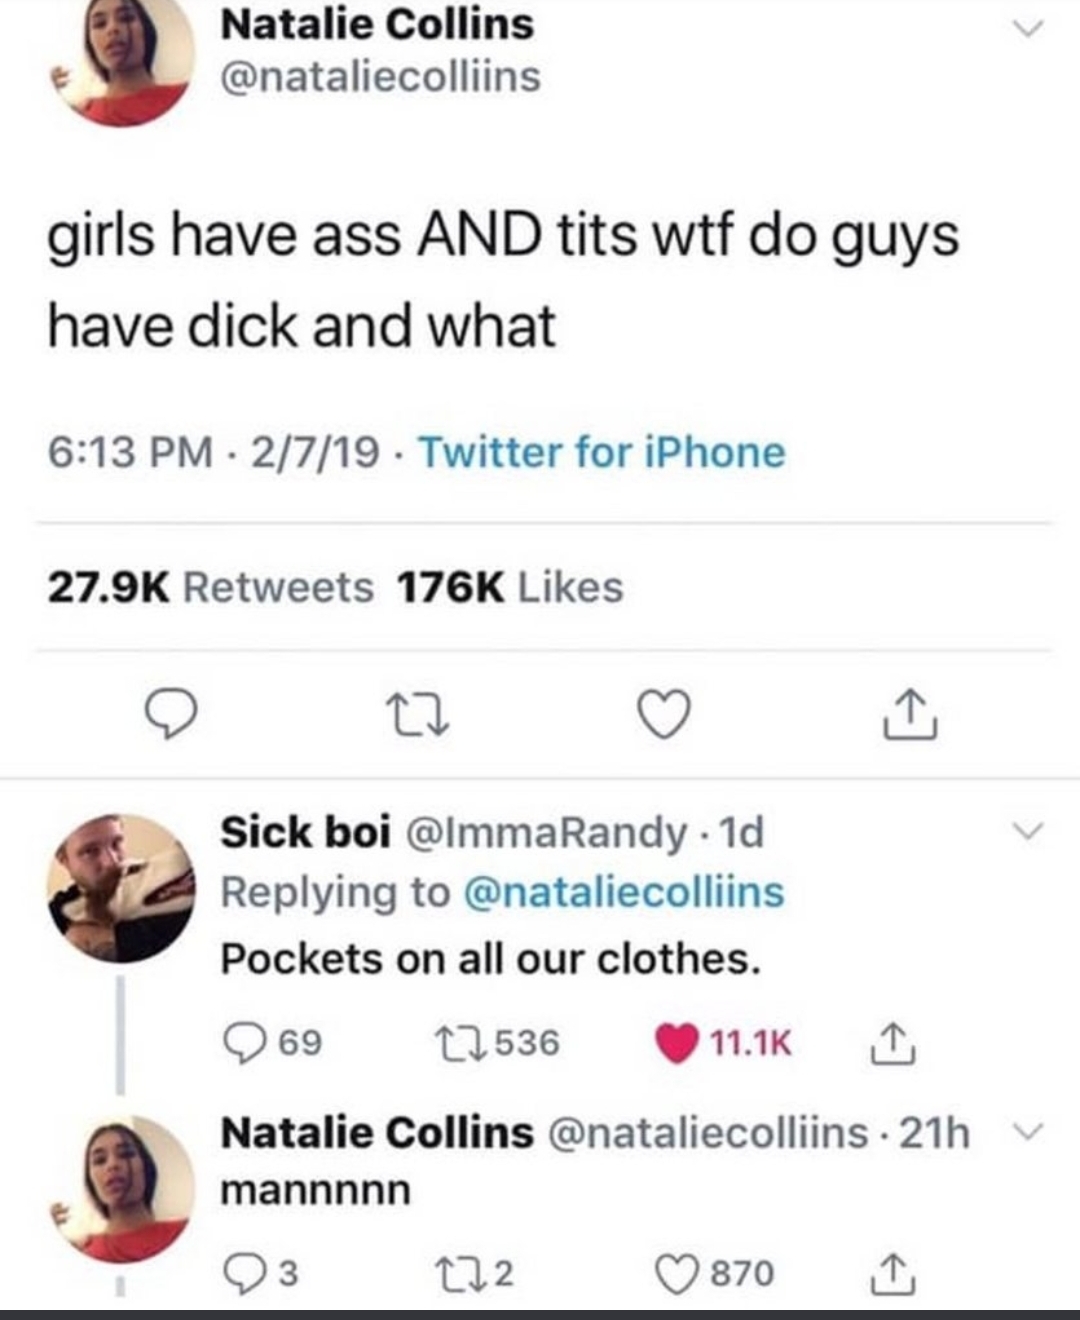 screenshot - Natalie Collins girls have ass And tits wtf do guys have dick and what 2719. Twitter for iPhone Sick boi . 1d Pockets on all our clothes. 269 12536 1 Natalie Collins 21h mannnnn 93 272 870